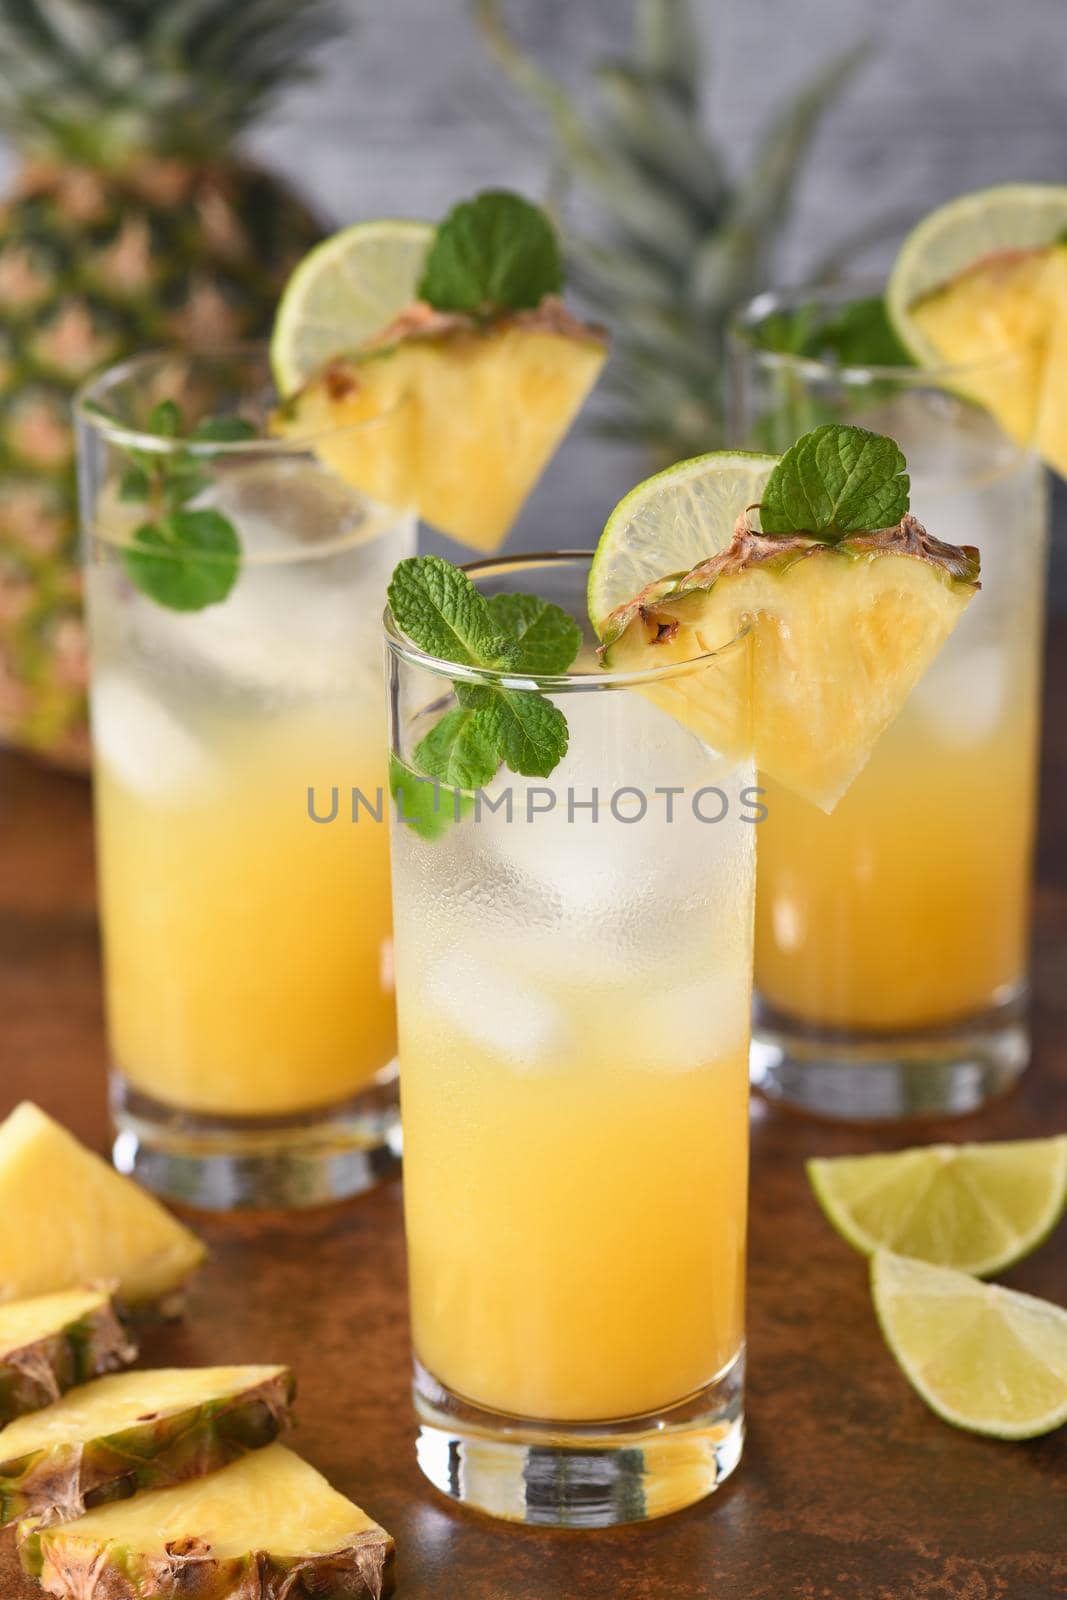 Pineapple mojito cocktail by Apolonia